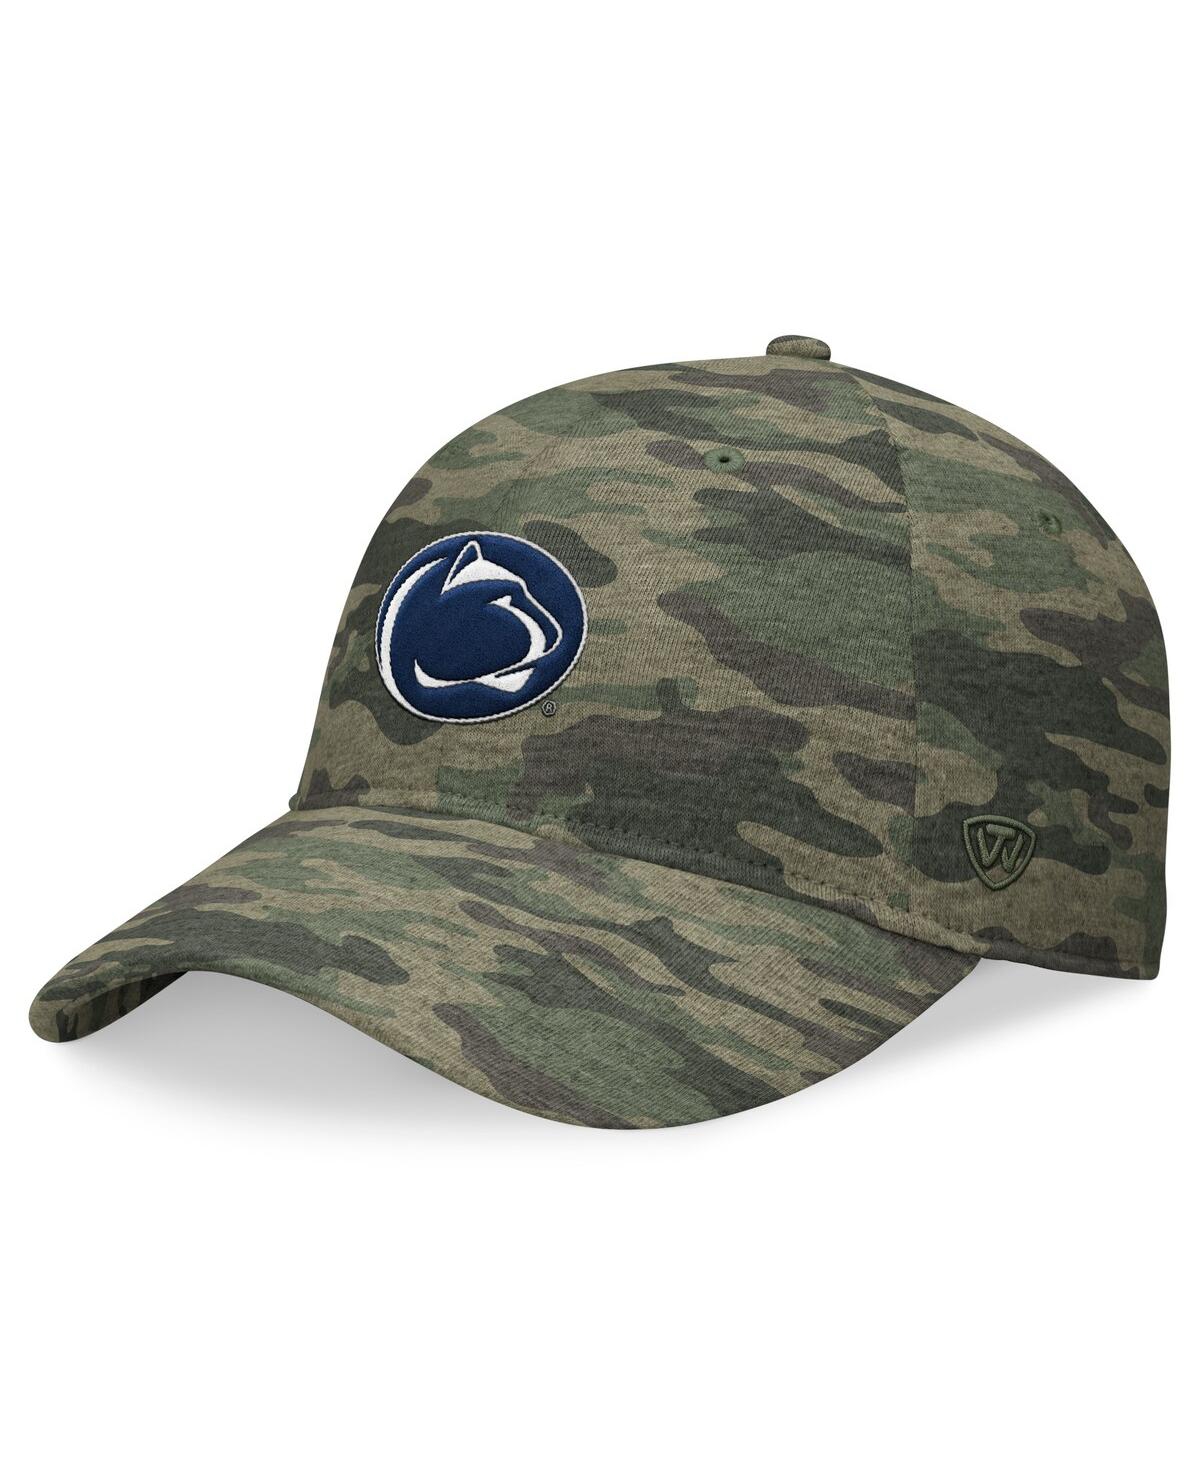 Shop Top Of The World Men's Camo Penn State Nittany Lions Oht Appreciation Hound Adjustable Hat In Wdlnd Camo